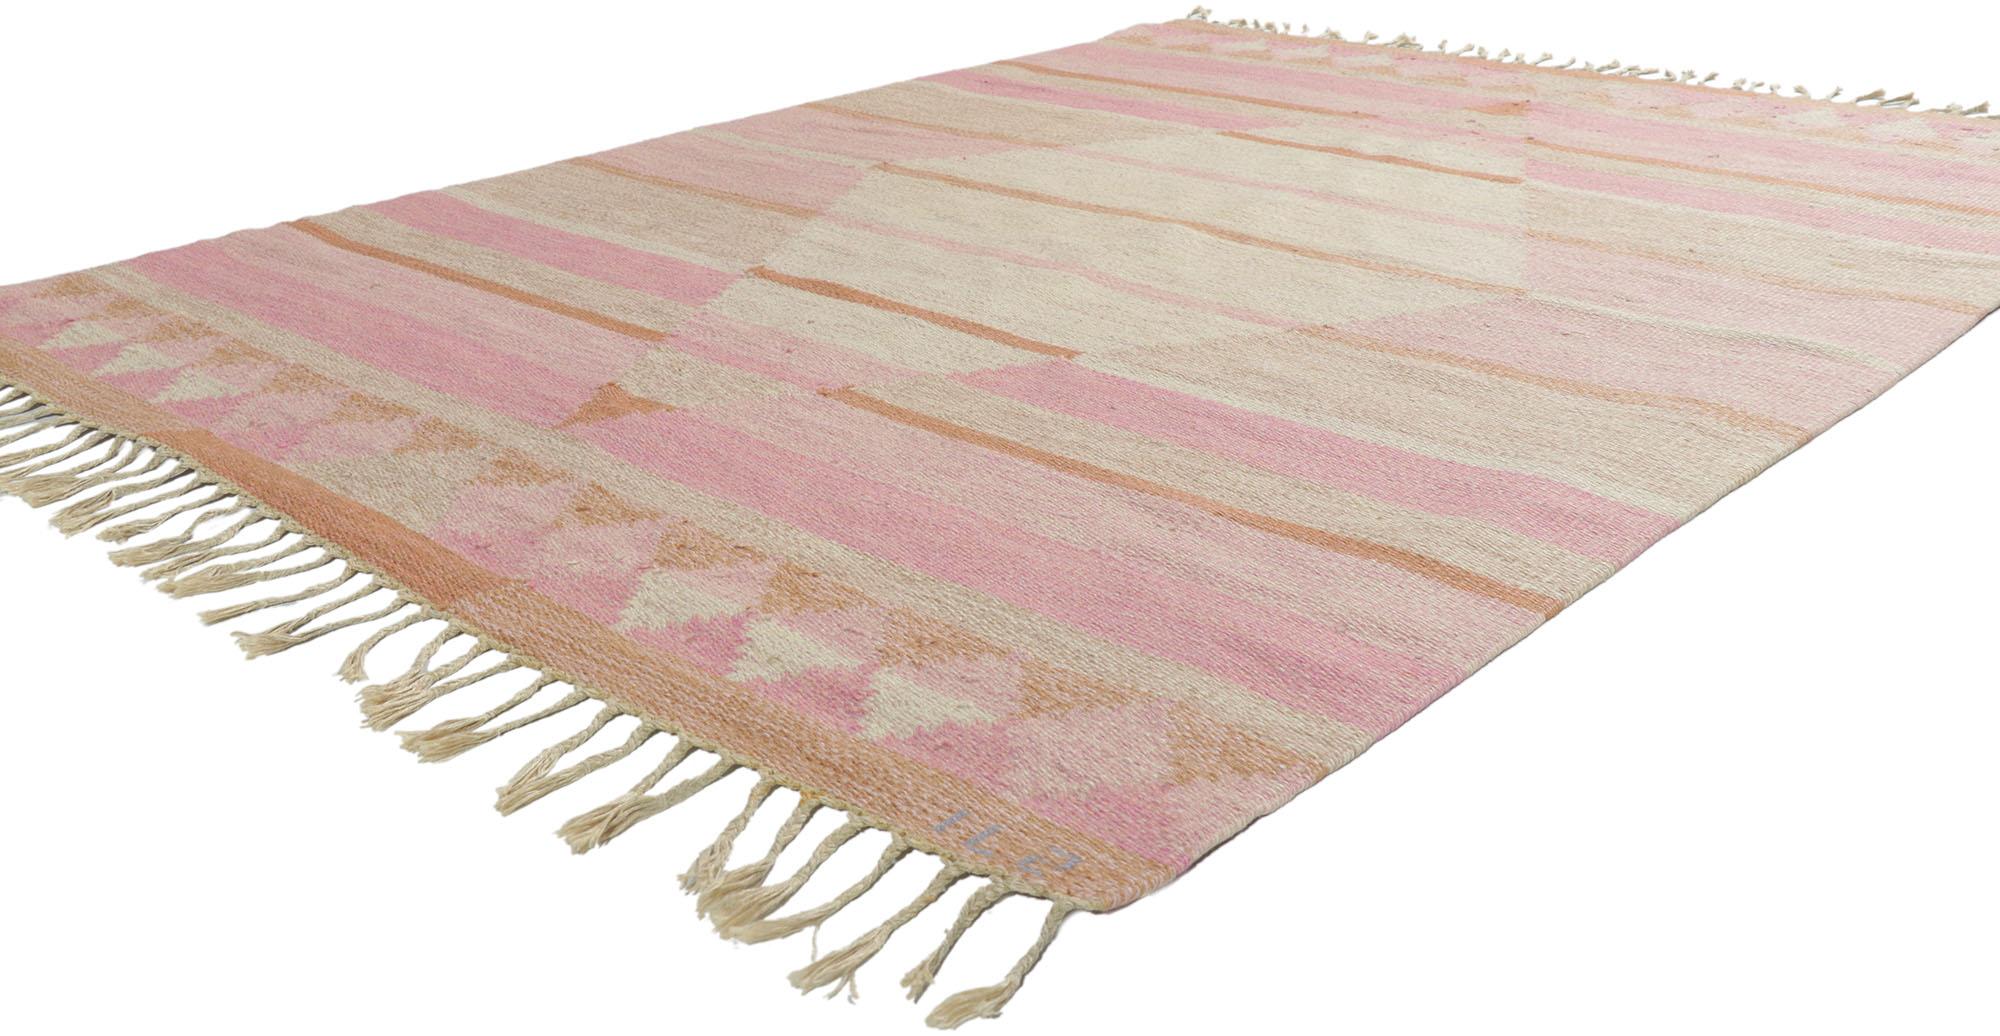 78250 Vintage Finnish Flatweave Rug for ILS, 05'04 x 06'11.
Emanating Scandinavian Modern style with incredible detail and texture, this handwoven Finnish flatweave rug is a captivating vision of woven beauty. The eye-catching geometric design and